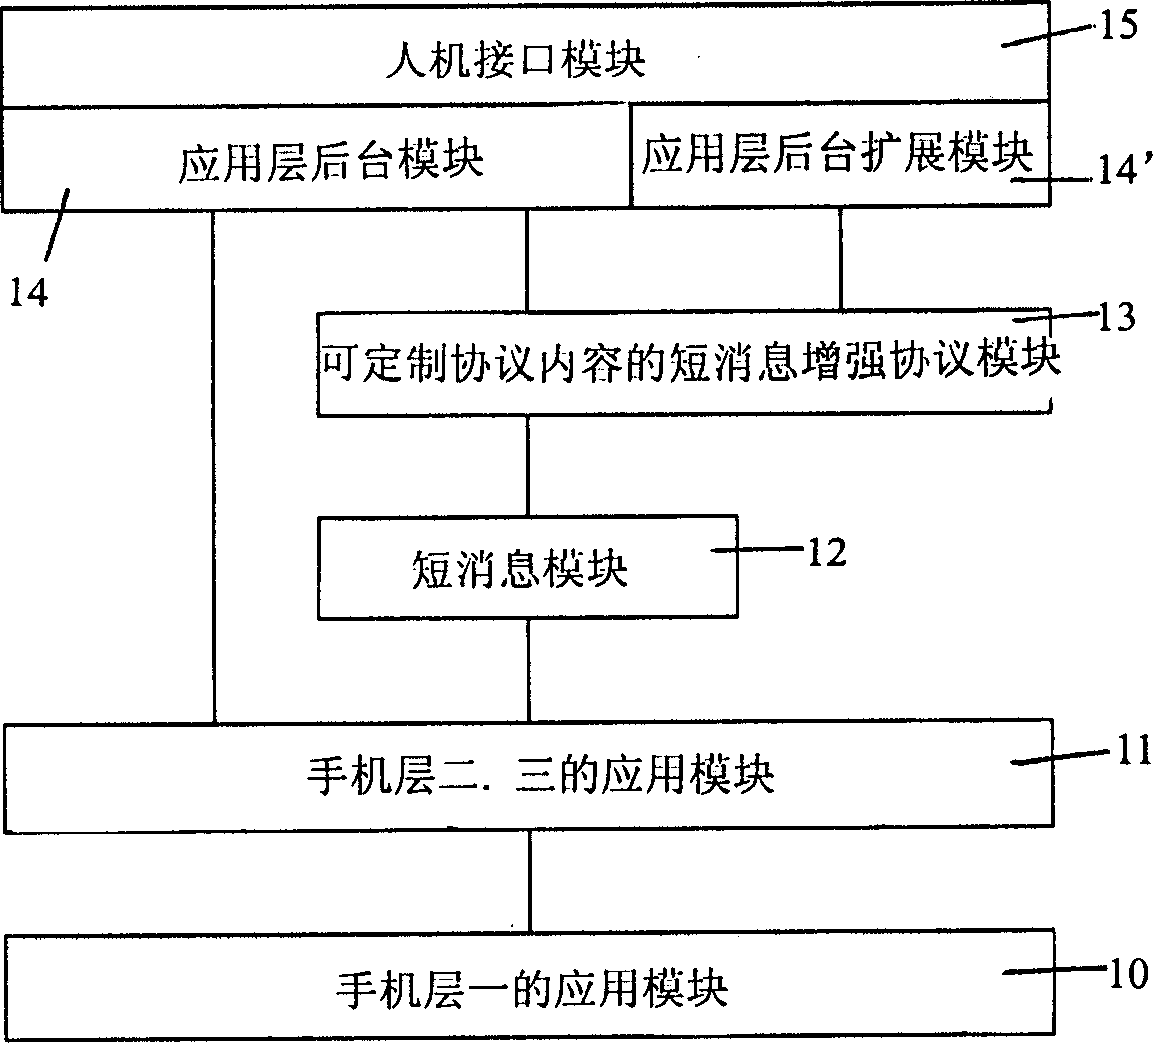 Method for raising short message service of mobile communication and its mobile terminal equipment